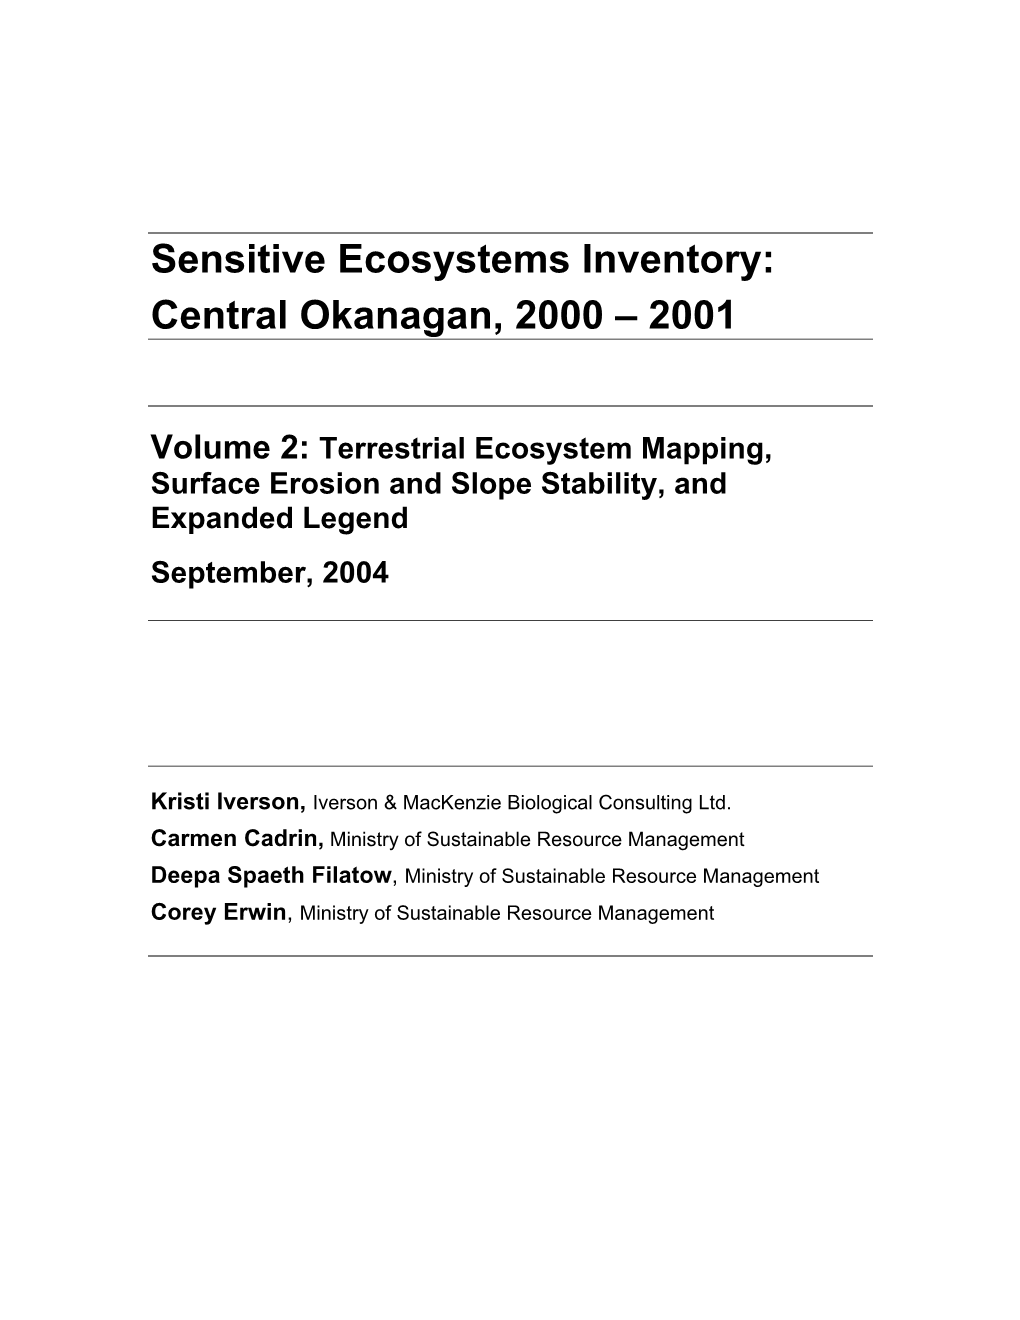 Terrestrial Ecosystem Mapping, Surface Erosion and Slope Stability, and Expanded Legend September, 2004